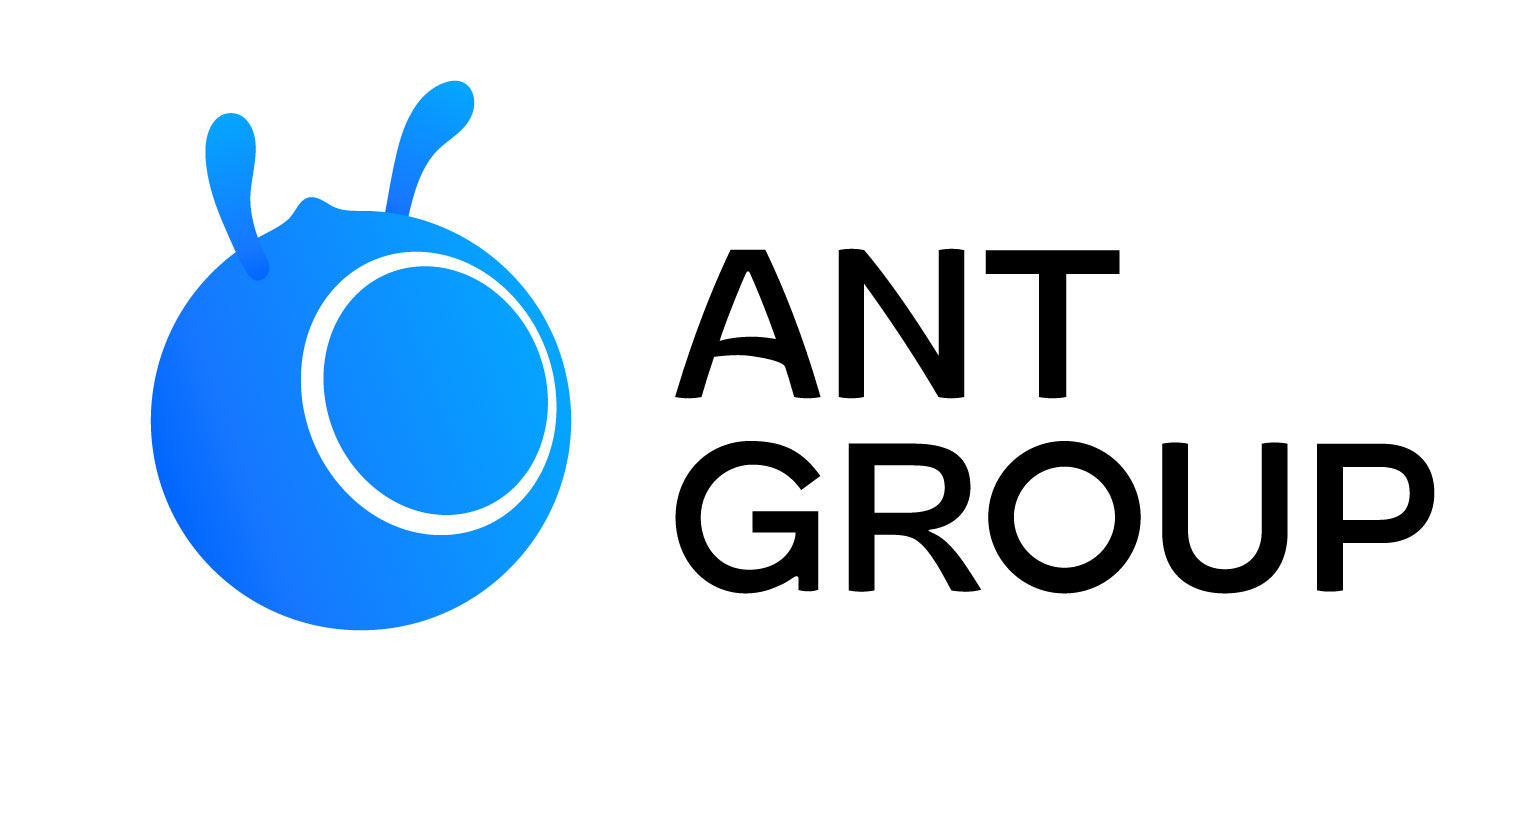 Ant Group Helps to Accelerate Low Carbon Innovation by Granting Free Patent Access to Its Green Computing Technologies | Business Wire